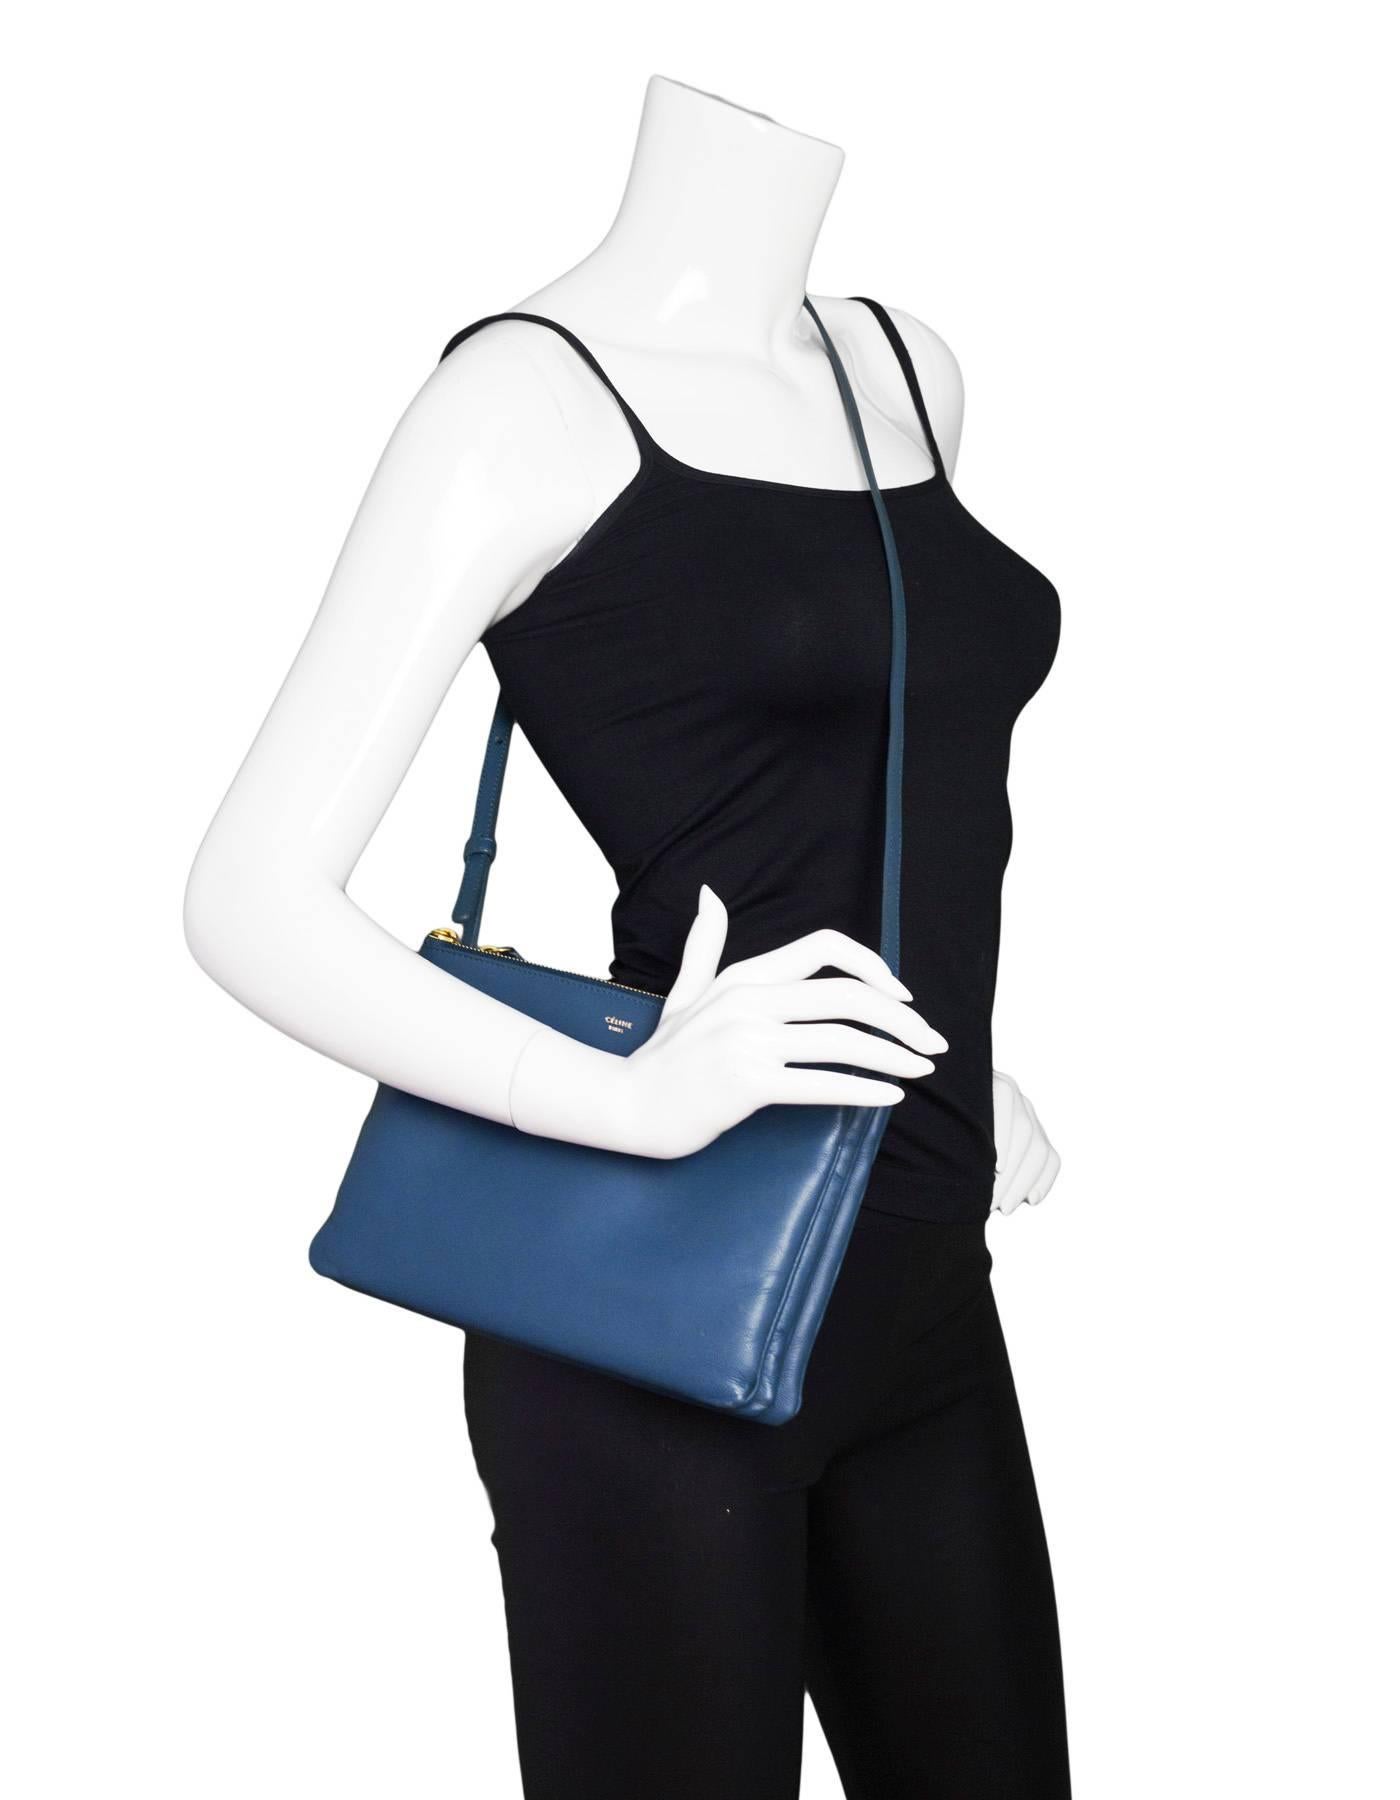 Celine Blue Leather Large Trio Crossbody Bag

Three zip pouches that snap together. Can wear all three together, or only one as a crossbody or clutch bag. You can be creative and mix and max with other Trio pouches for a unique look.

Made In: